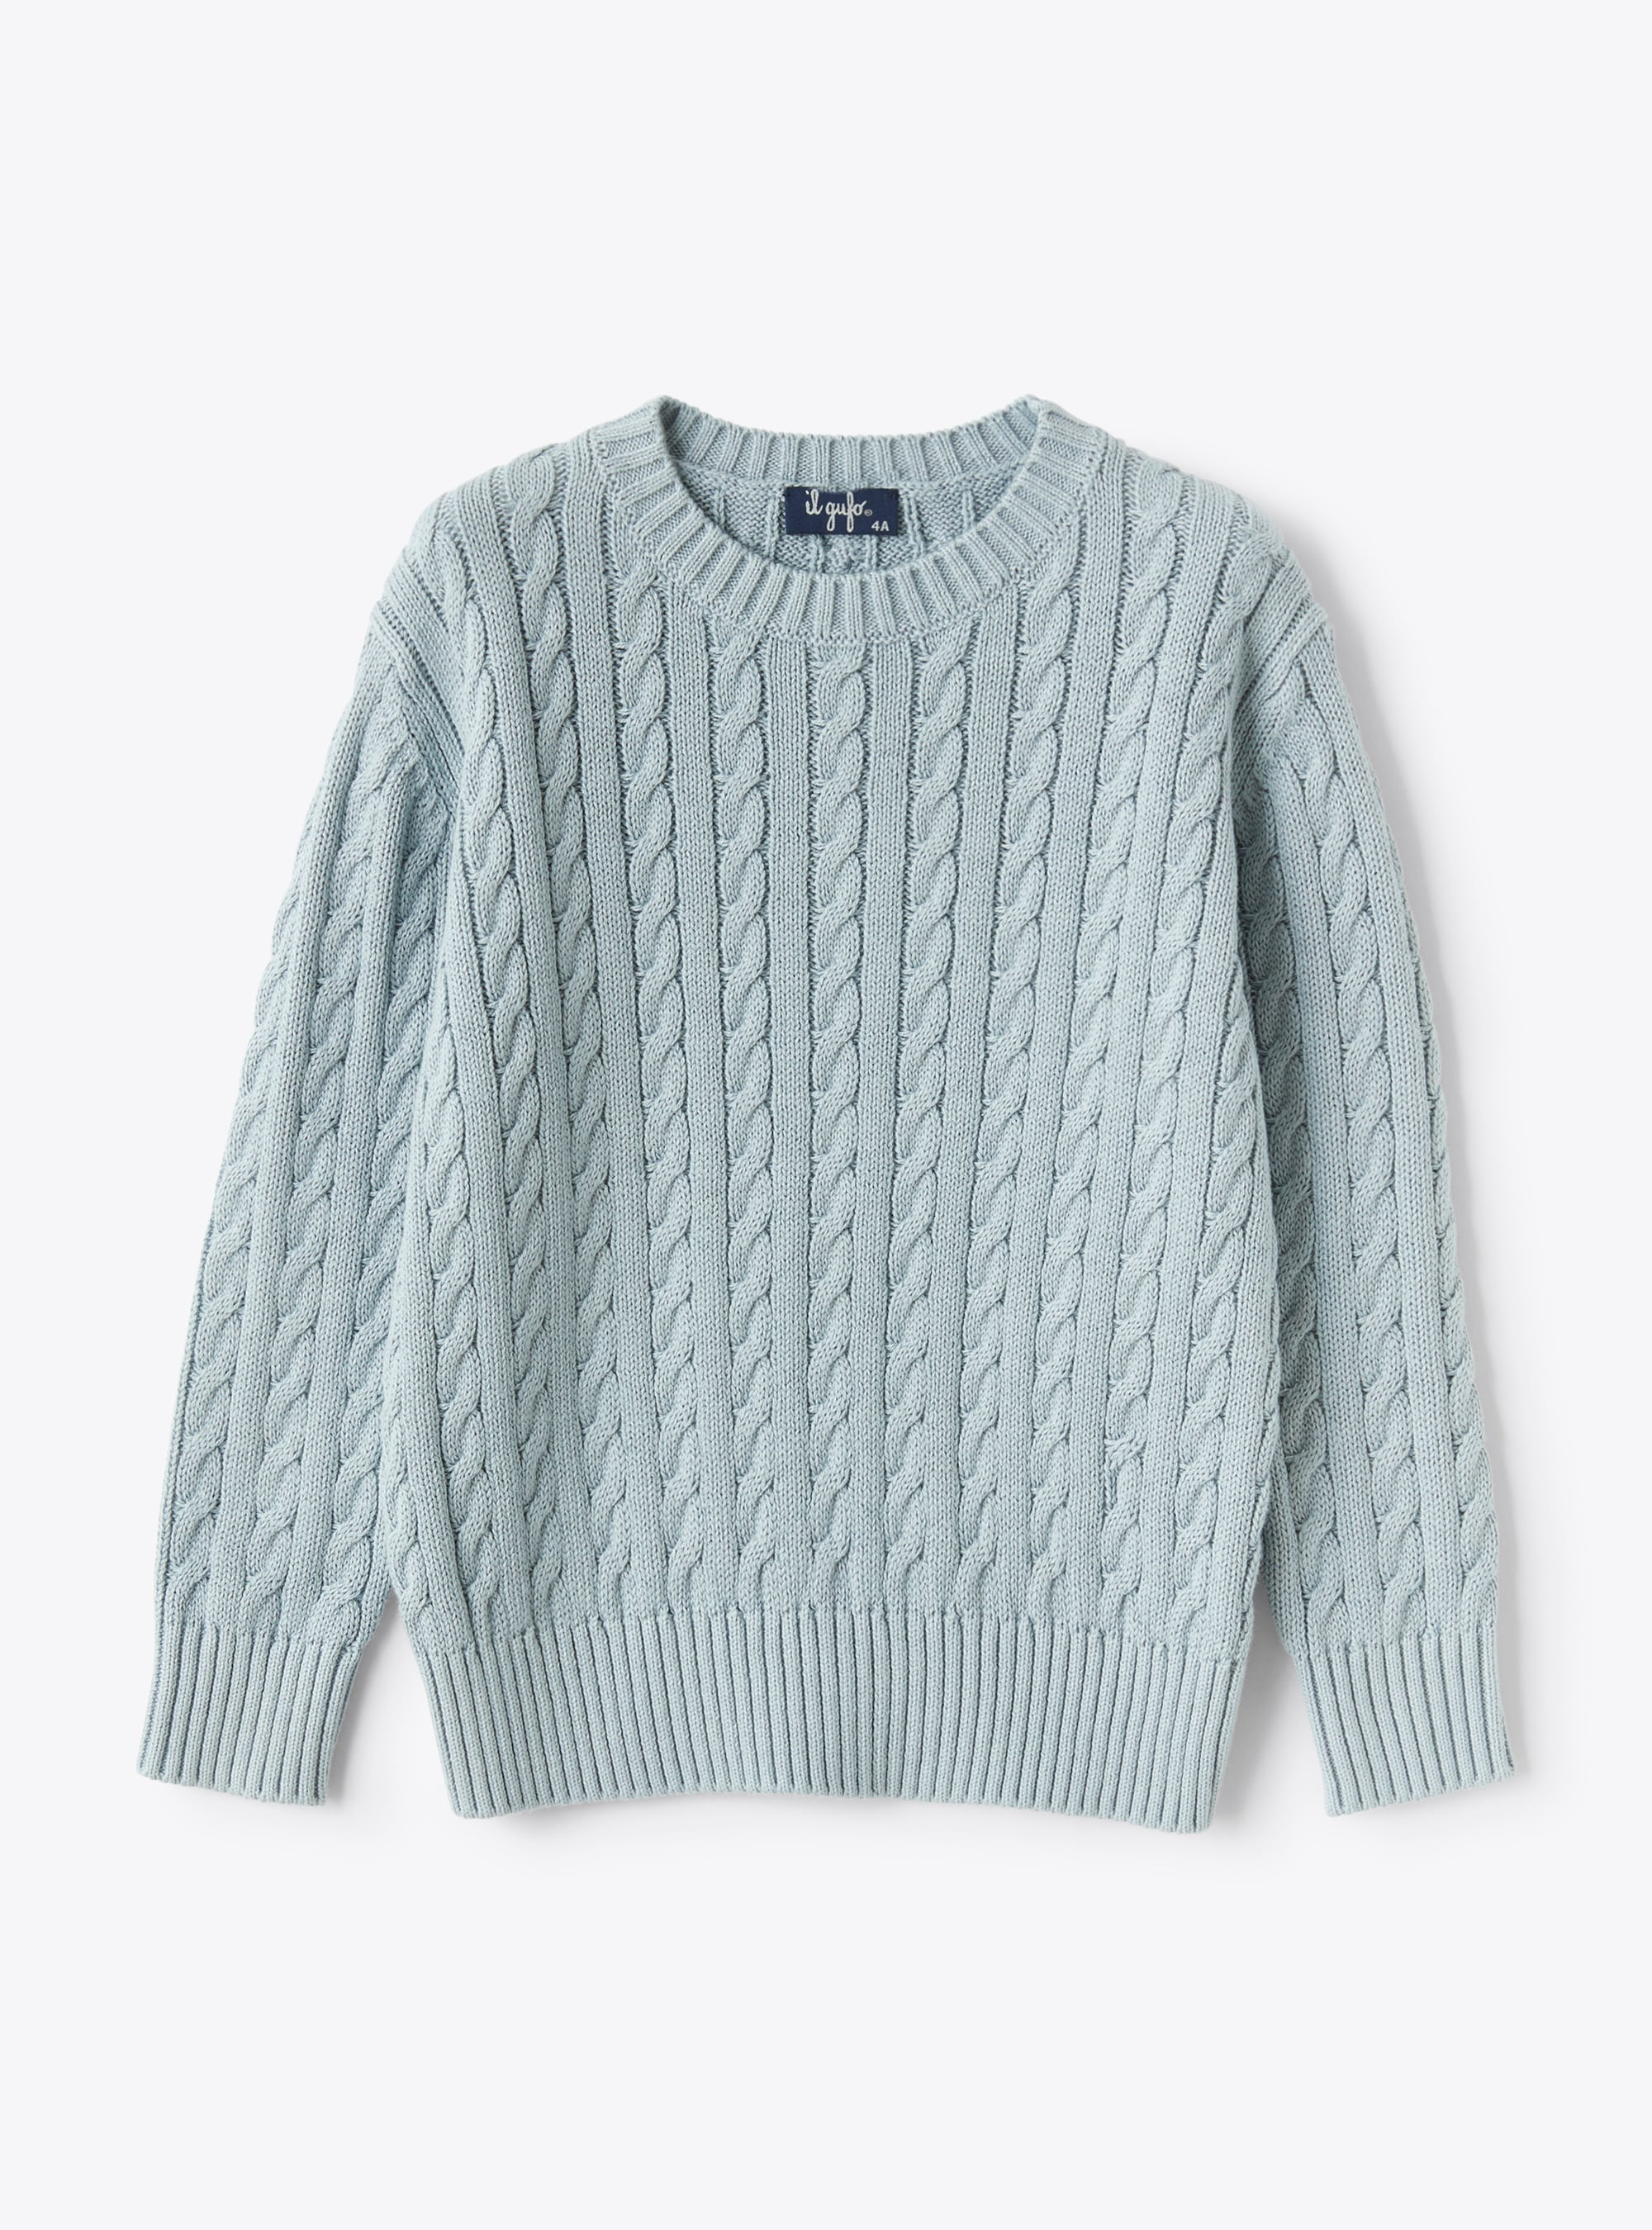 Cable-patterned sweater in organic blueberry-hued cotton - Sweaters - Il Gufo